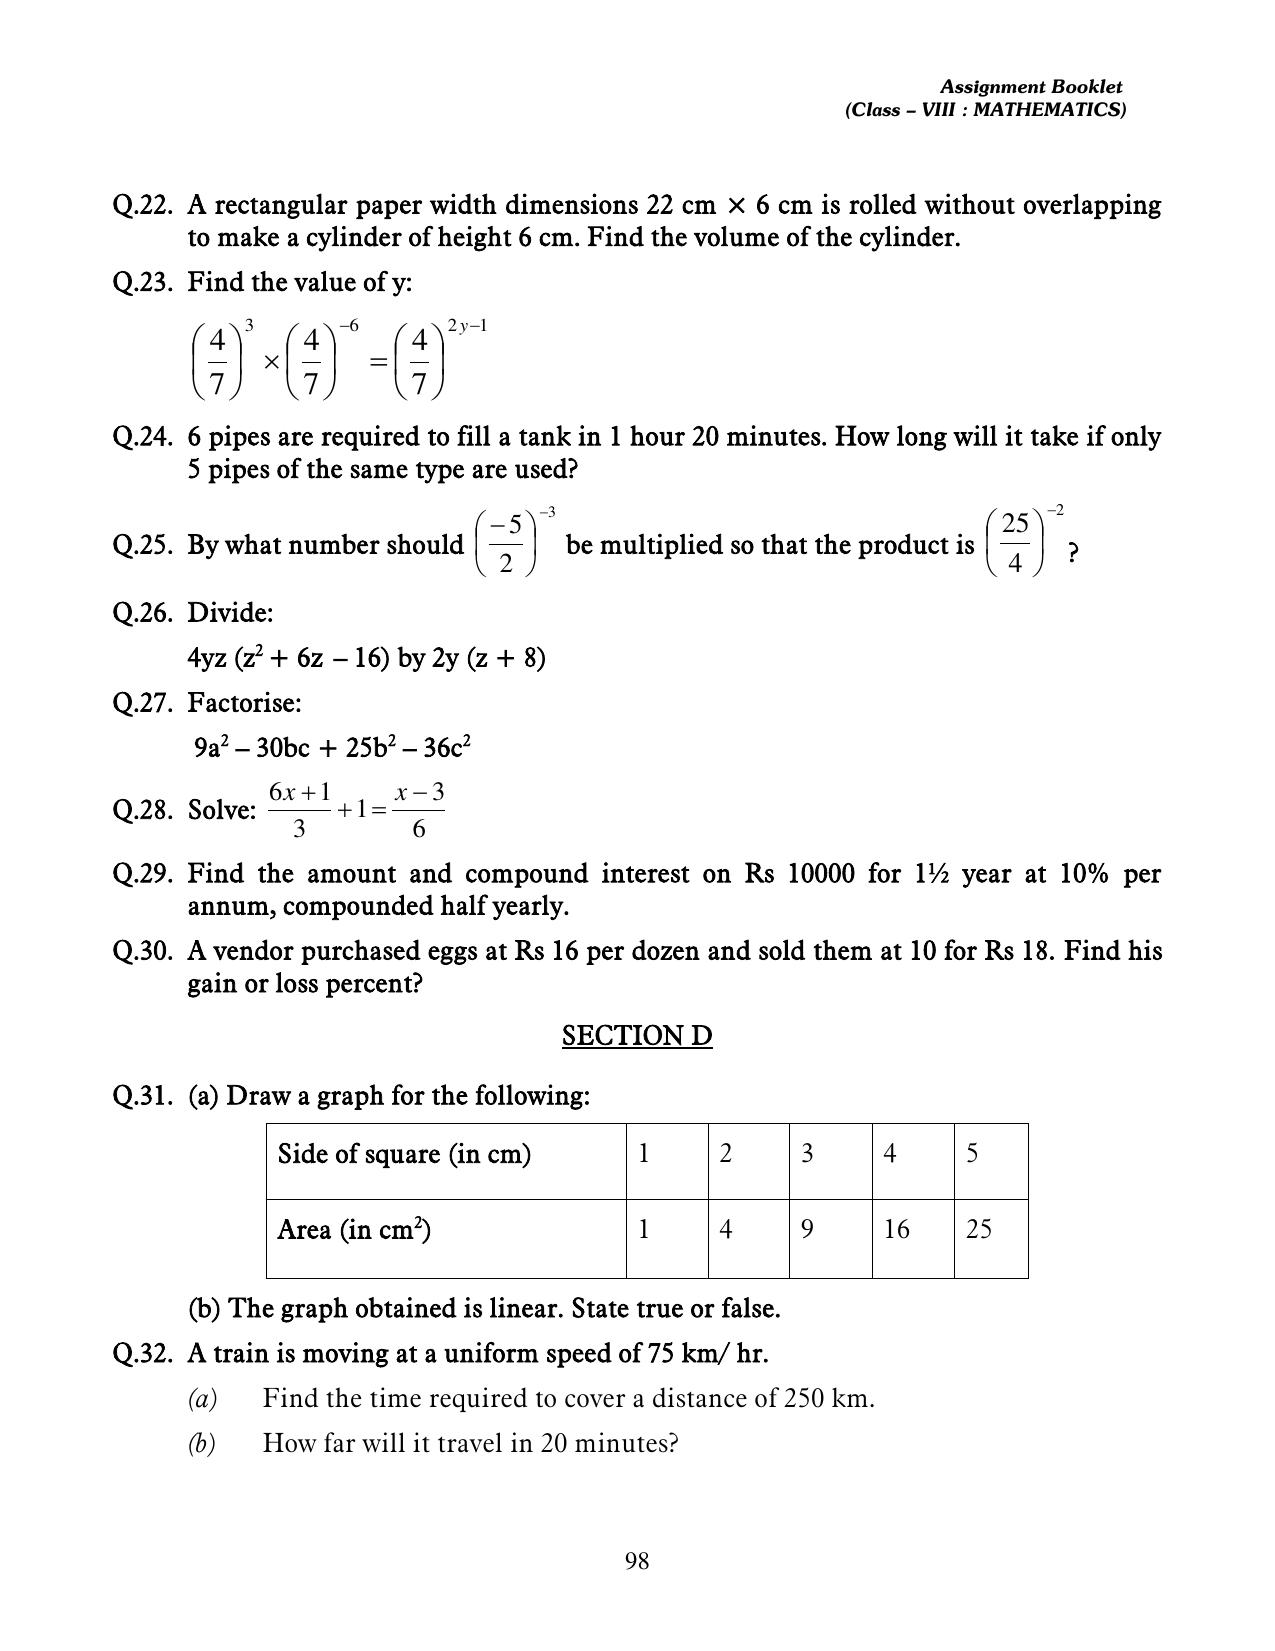 CBSE Worksheets for Class 8 Mathematics Assignment 13 - Page 88